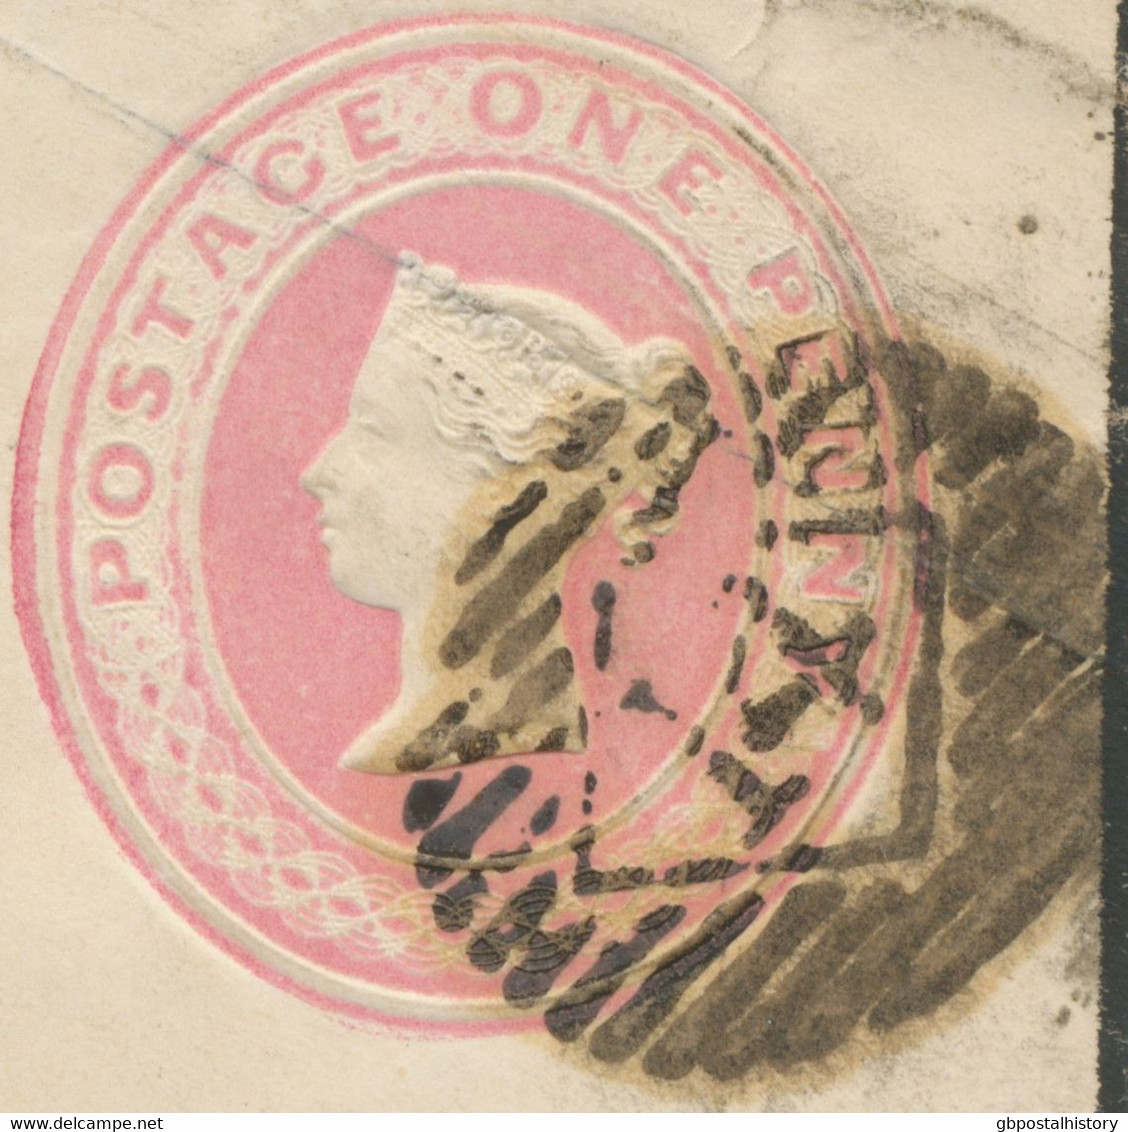 GB LONDON Inland Office „14“ Numeral Postmark (Parmenter 14B) On Very Fine Printed To Order (made Mourning Envelope From - Lettres & Documents